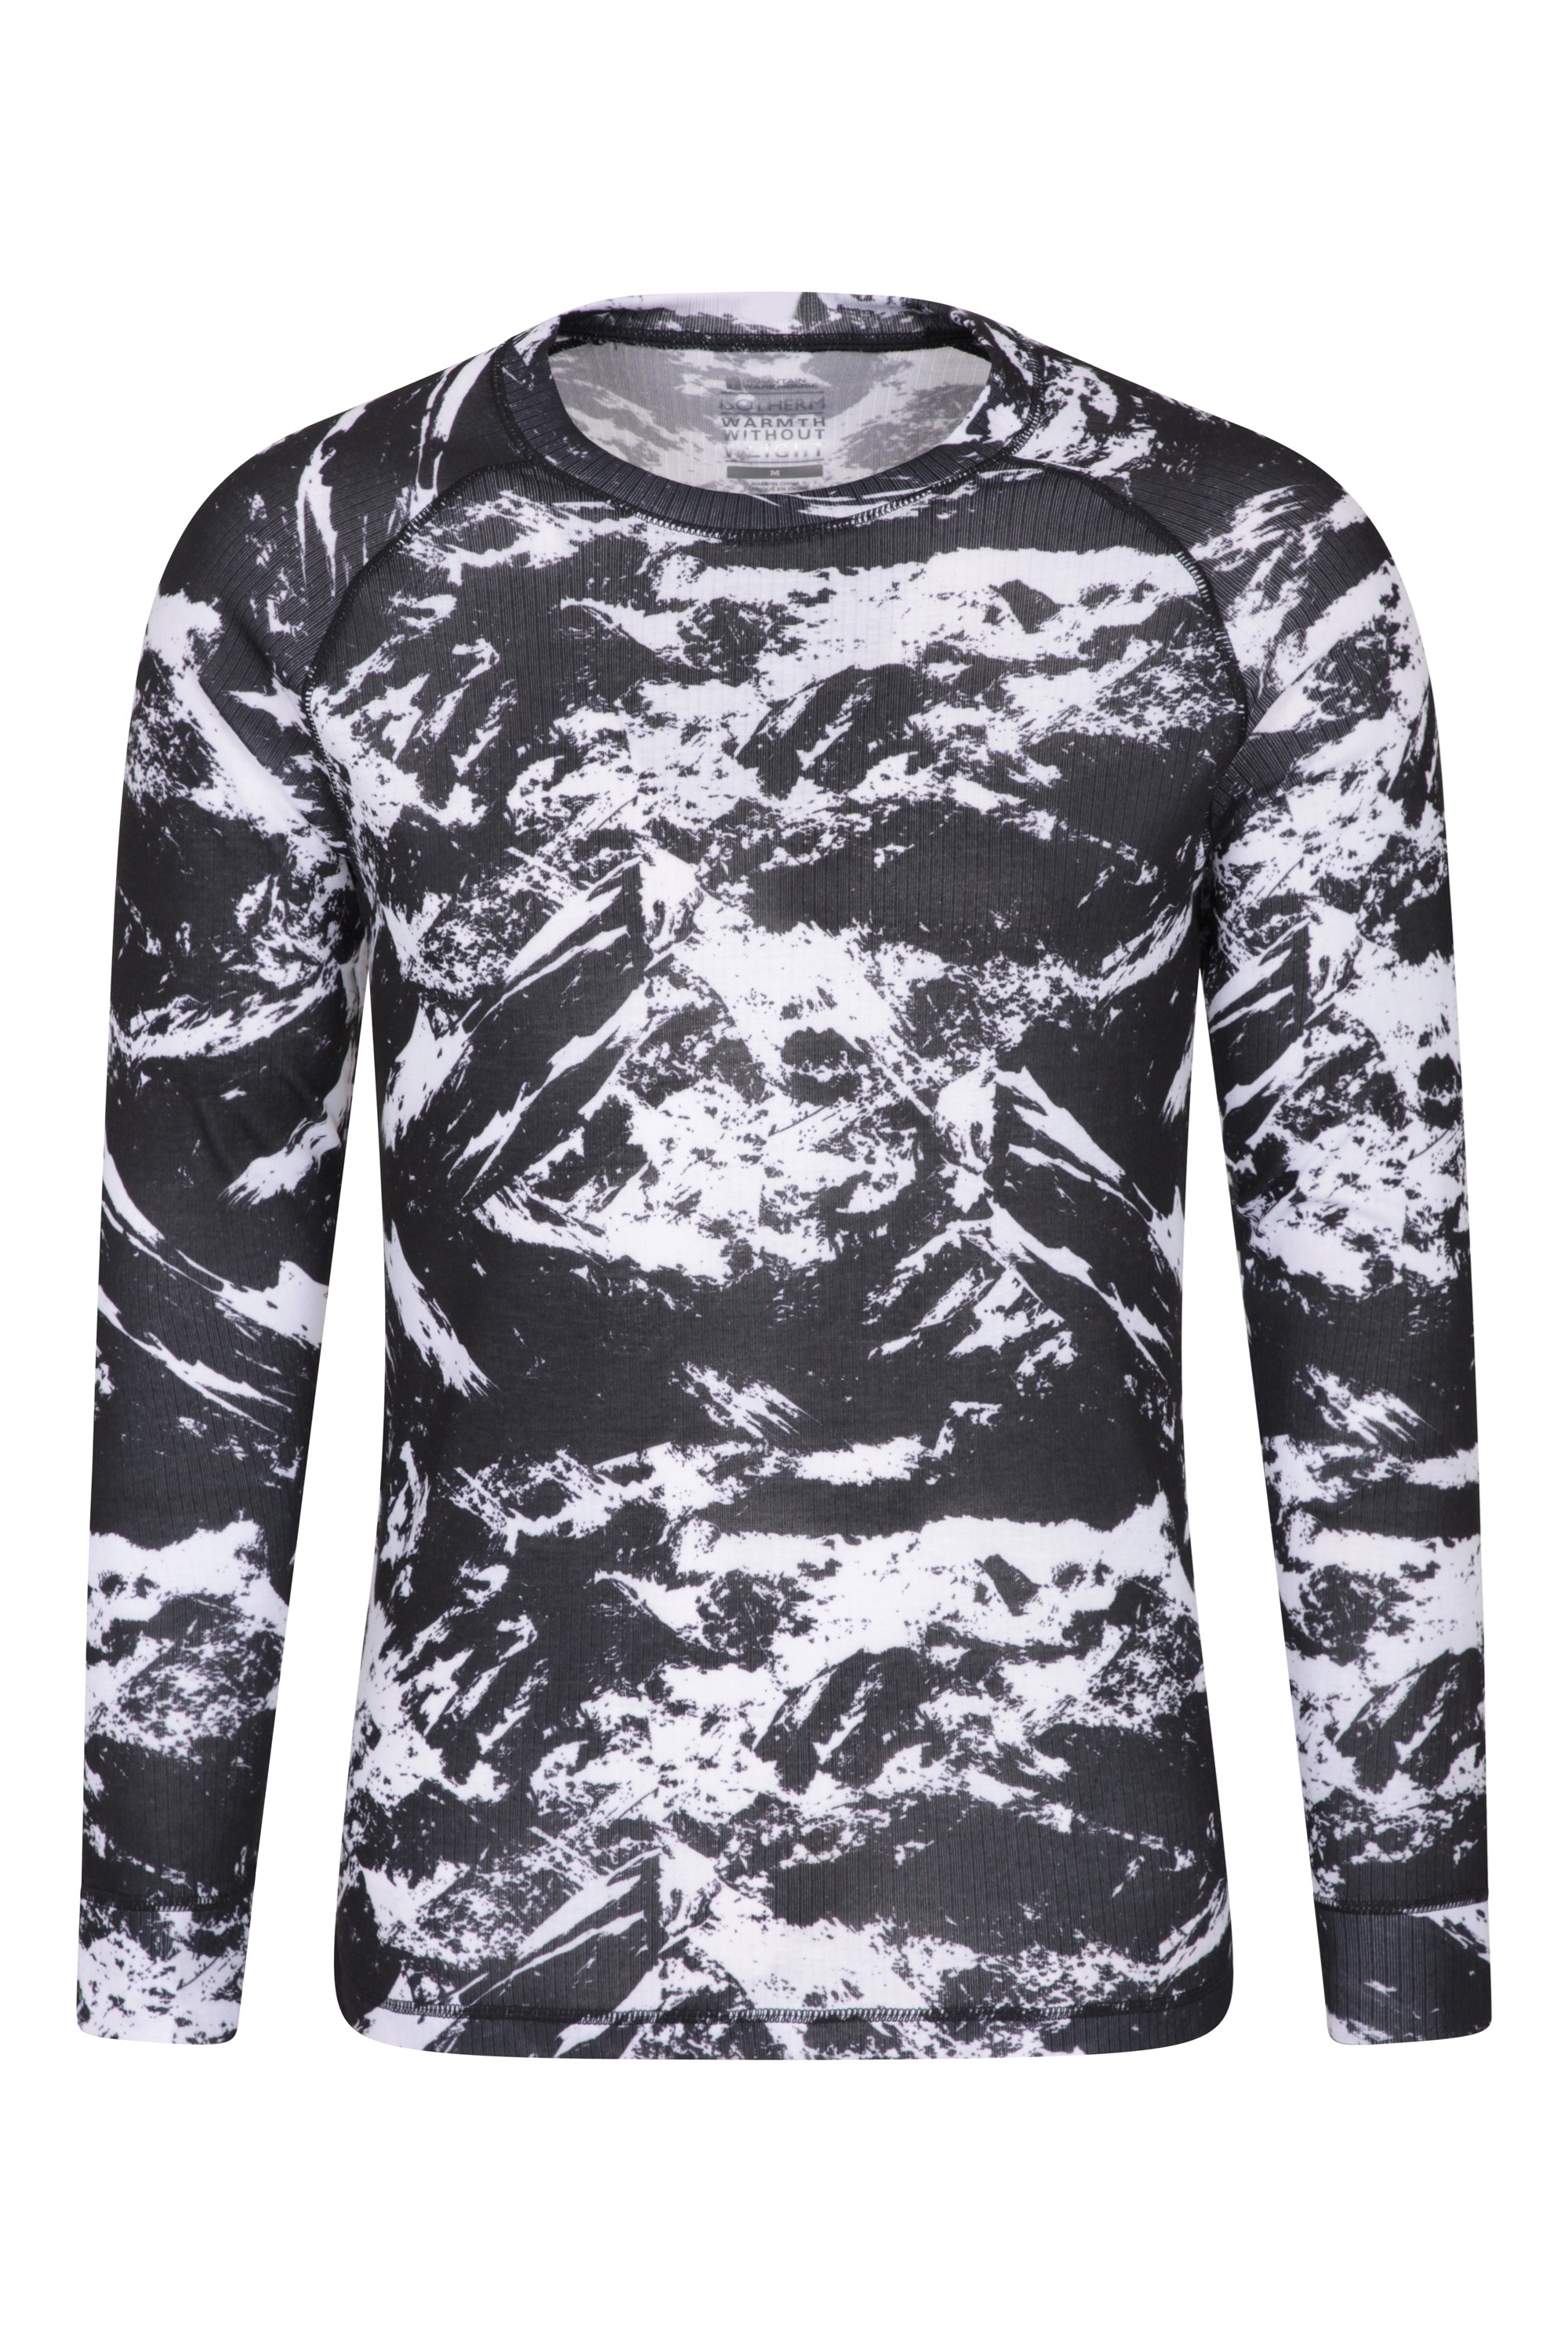 Mountain Warehouse Mens Printed Round Neck Top Thermal Base Layer Breathable 